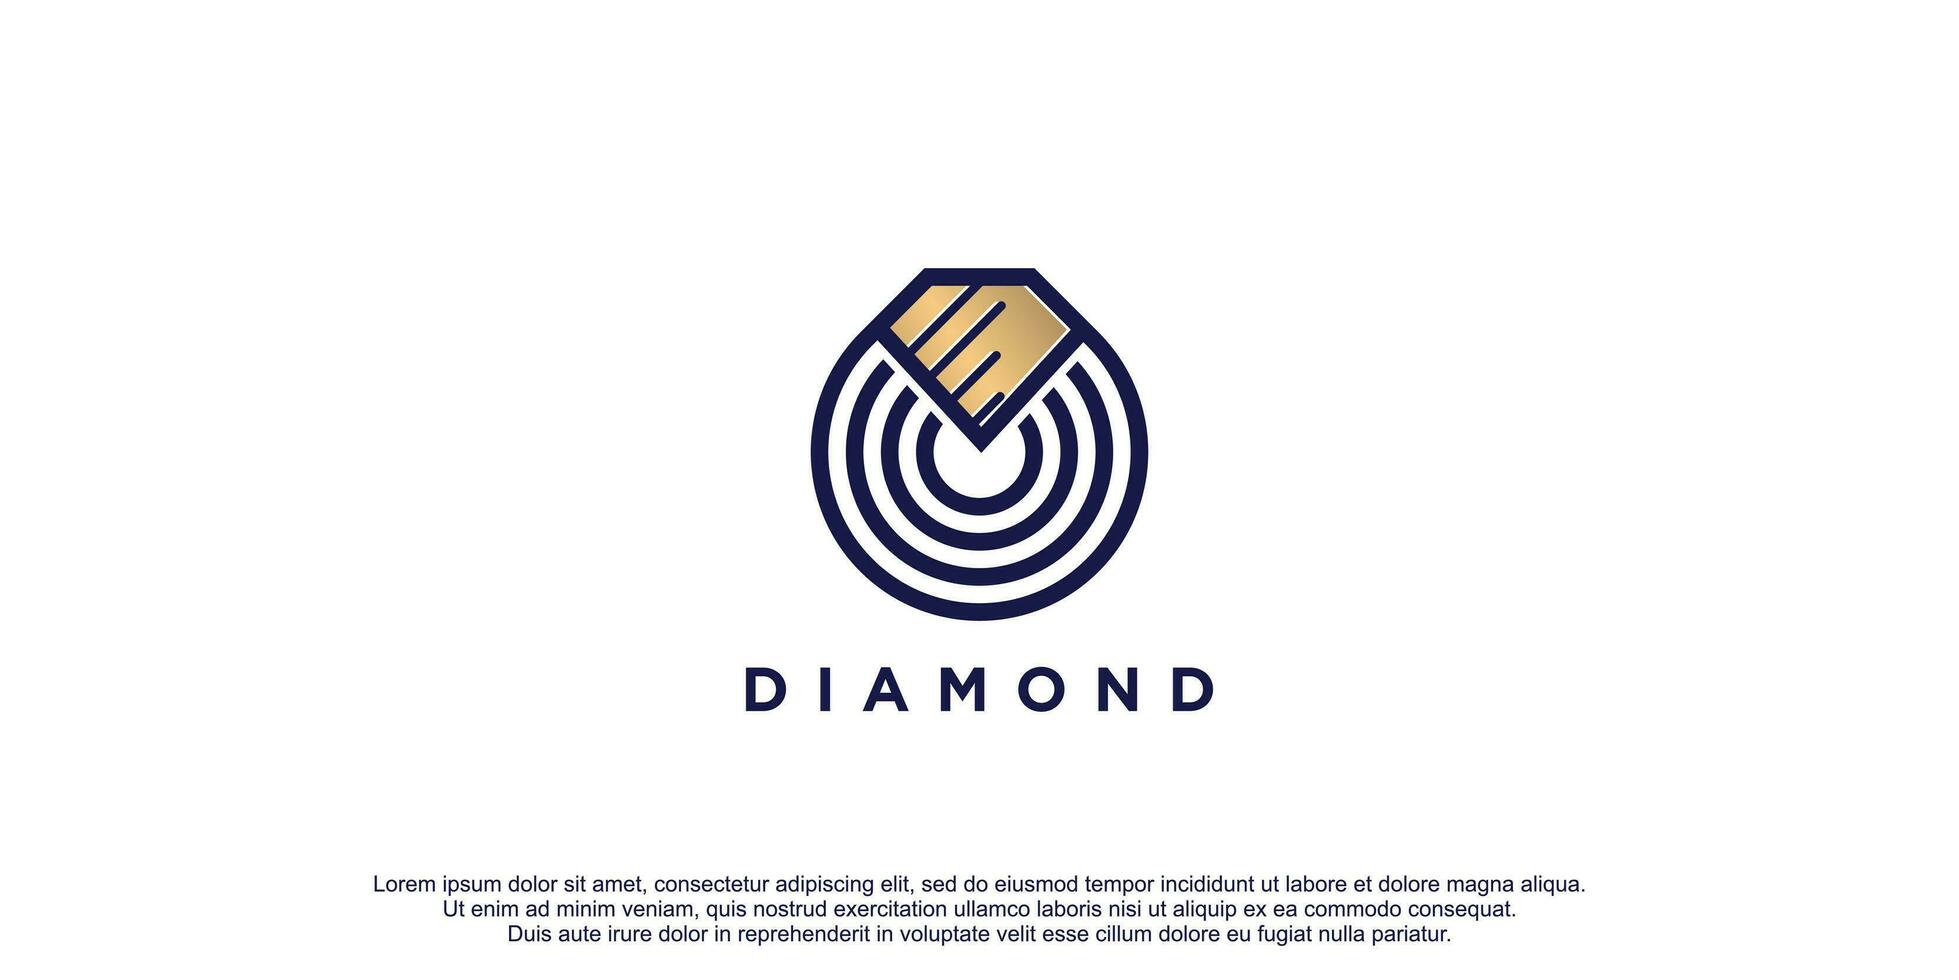 Diamond logo template with creative concept and style design vector